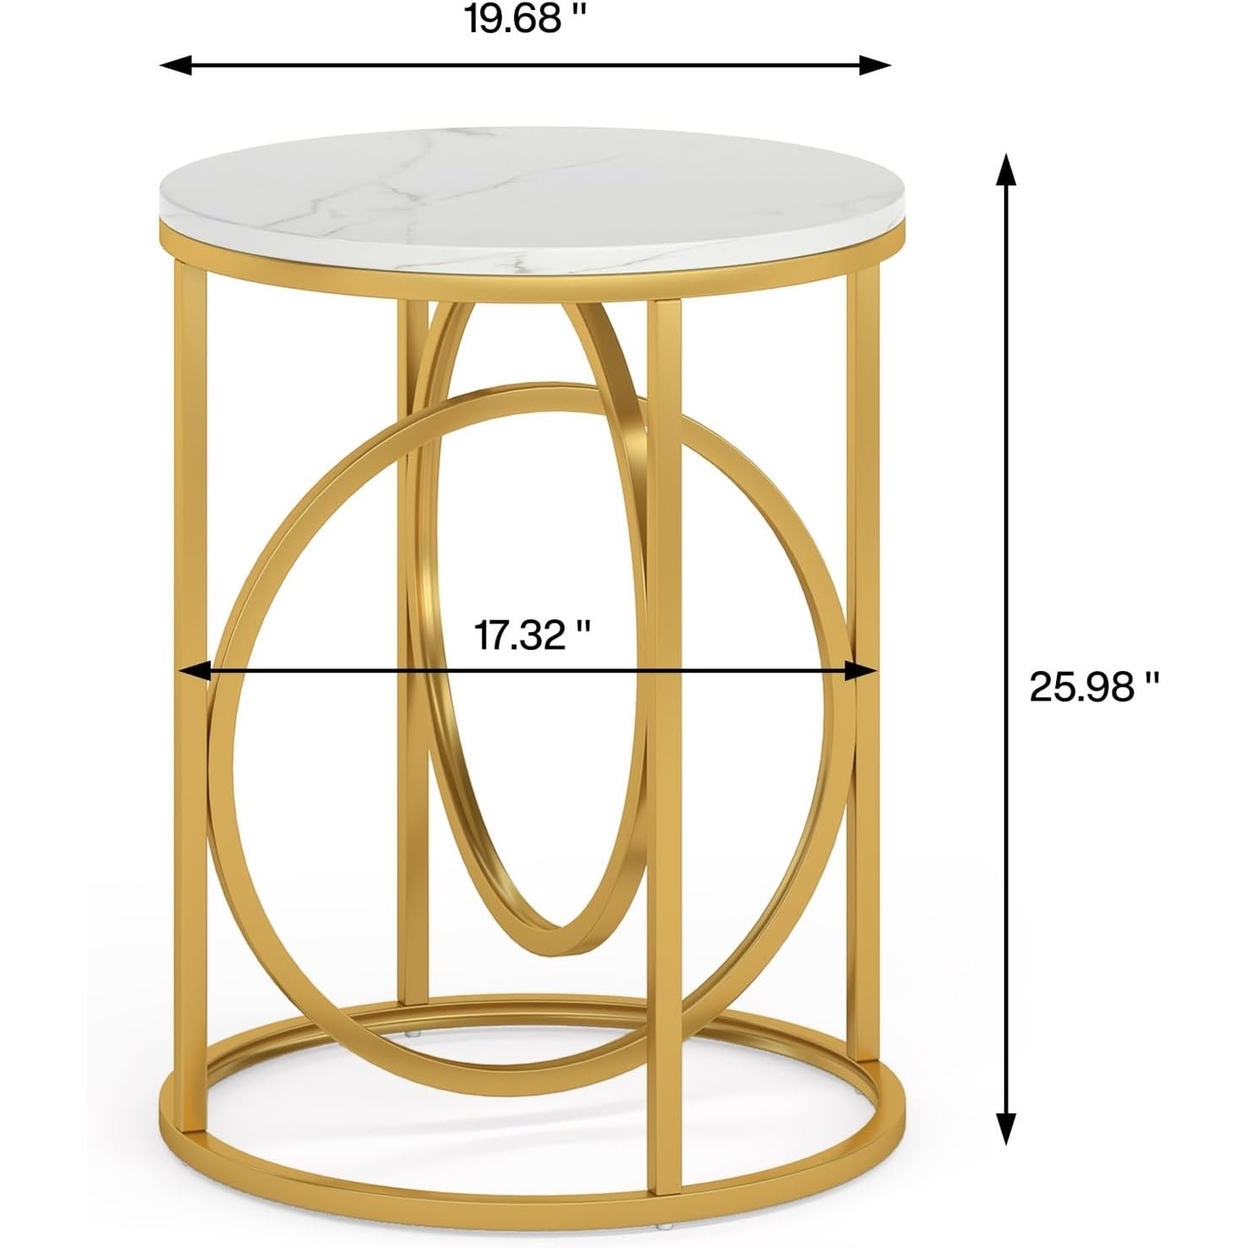 Tribesigns Modern Round End Table, 20 Sofa Side Table Cocktail Table With Unique Gold O-Shaped Base - White, 2pcs